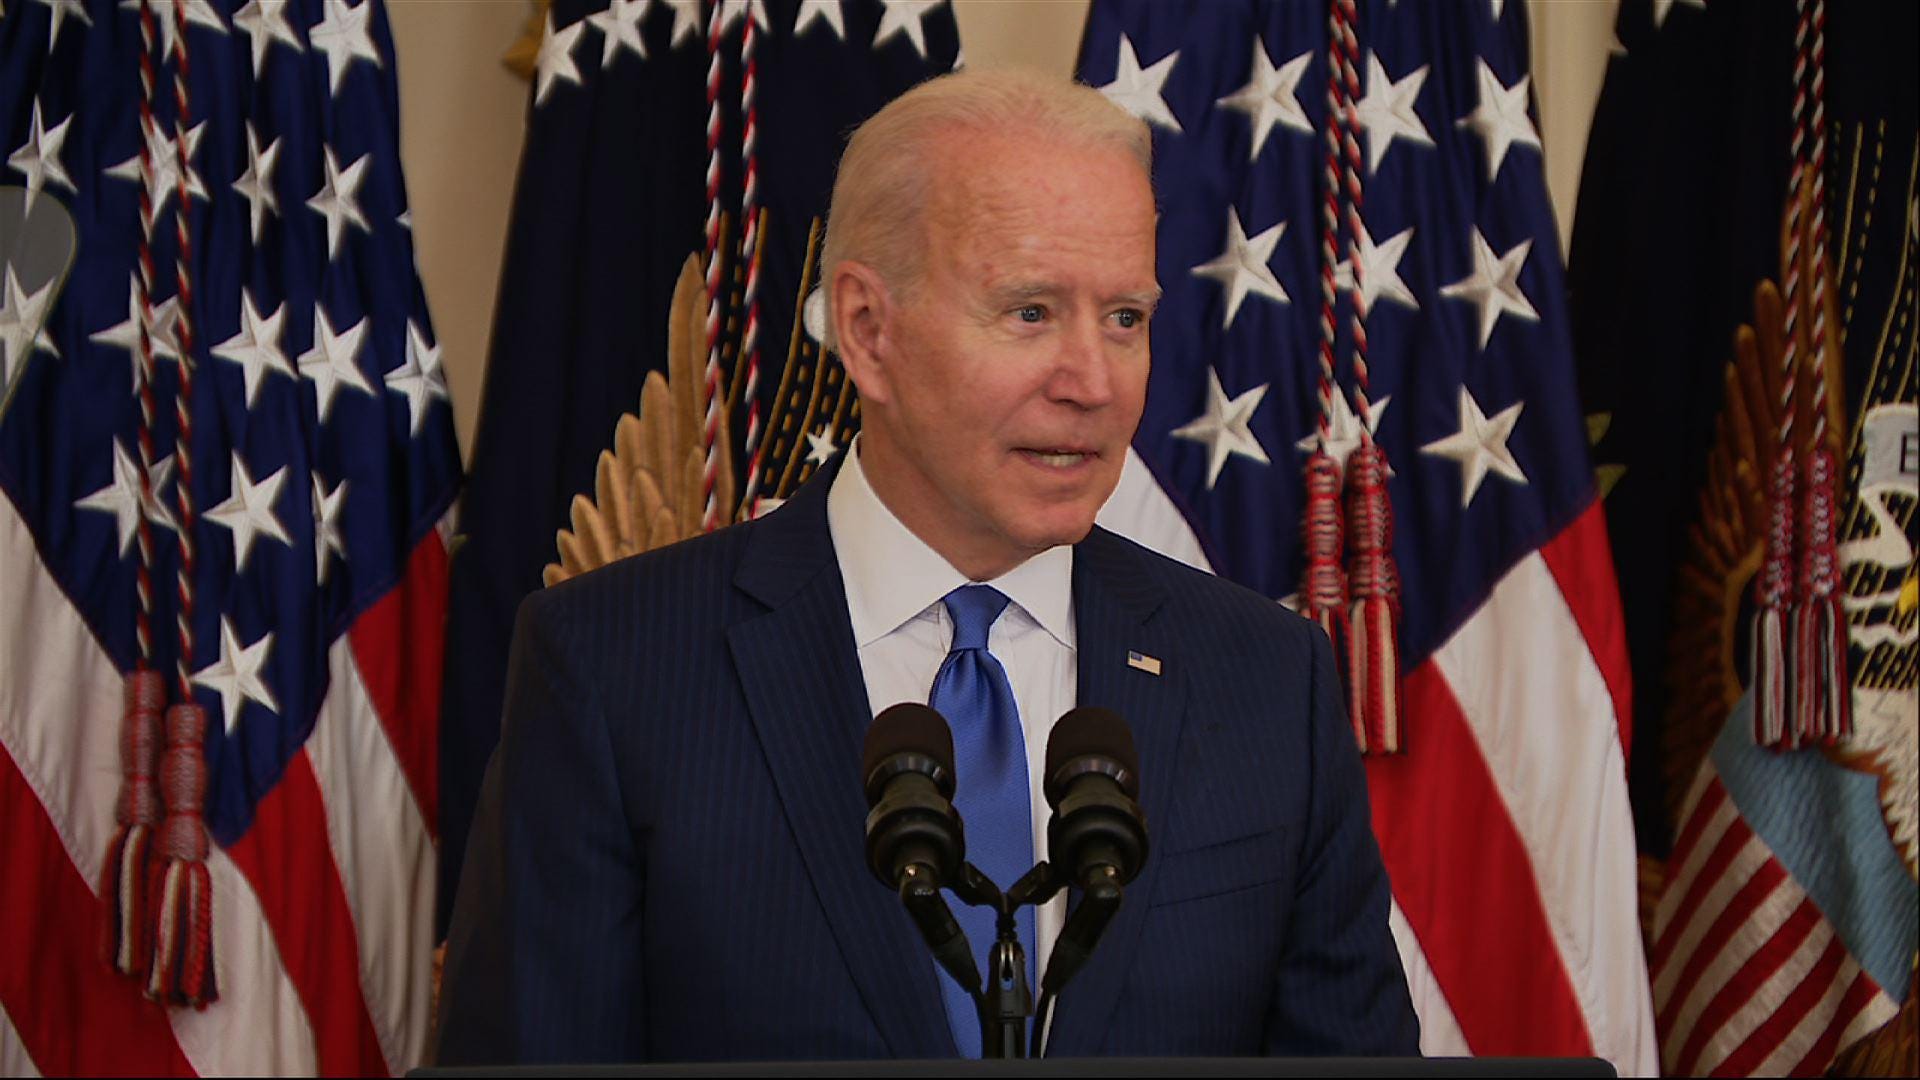 Biden declares "Pride is back at the White House"